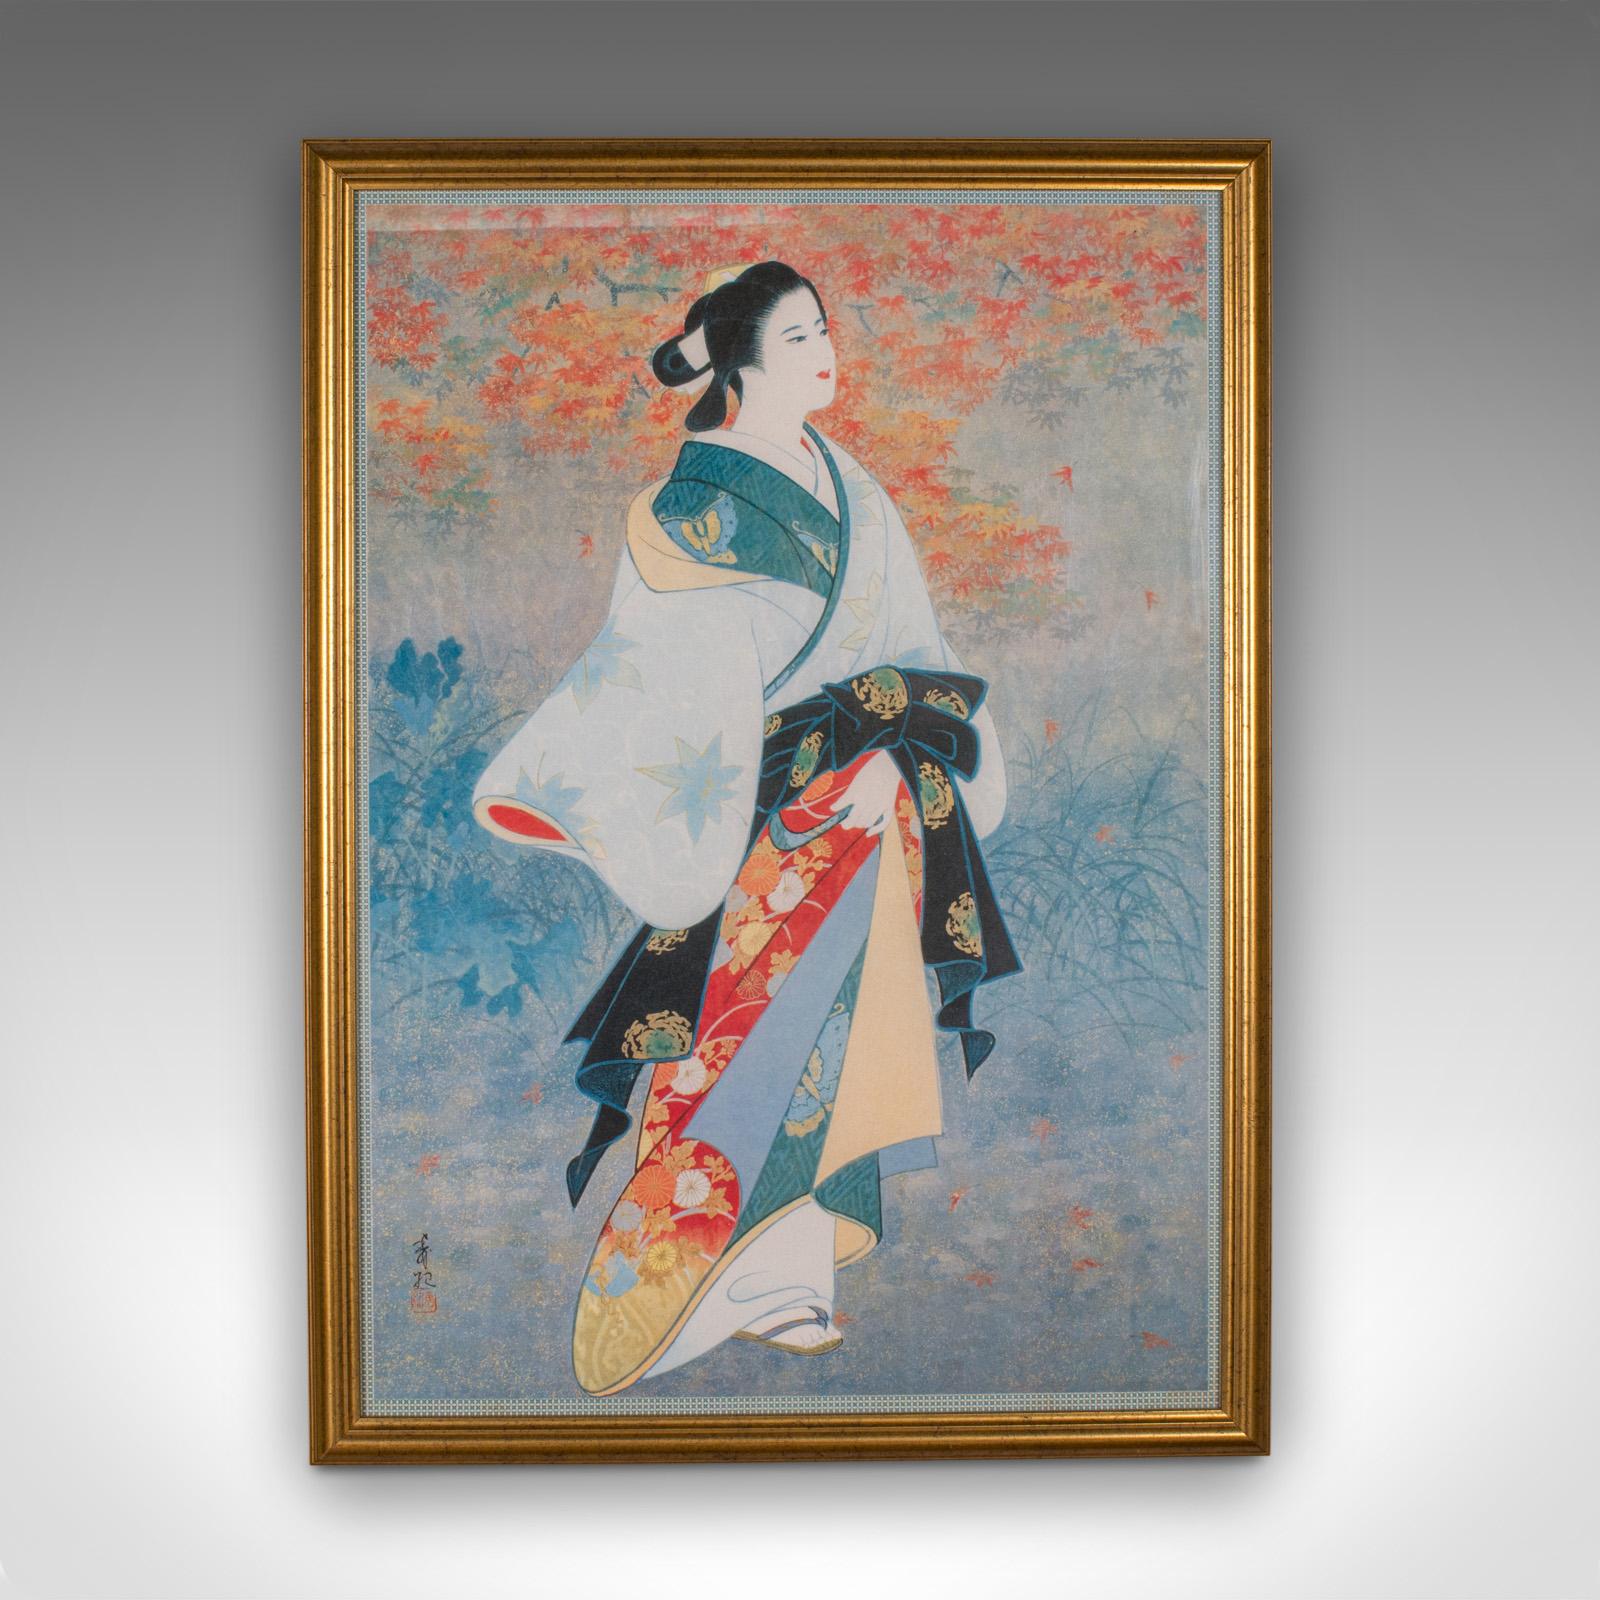 This is a vintage geisha print. A Japanese, gilt framed female figure from the late Art Deco period, circa 1950.

Evocative woodblock-type geisha figure with wonderful colour
Displays a desirable aged patina and in good order
Striking costume